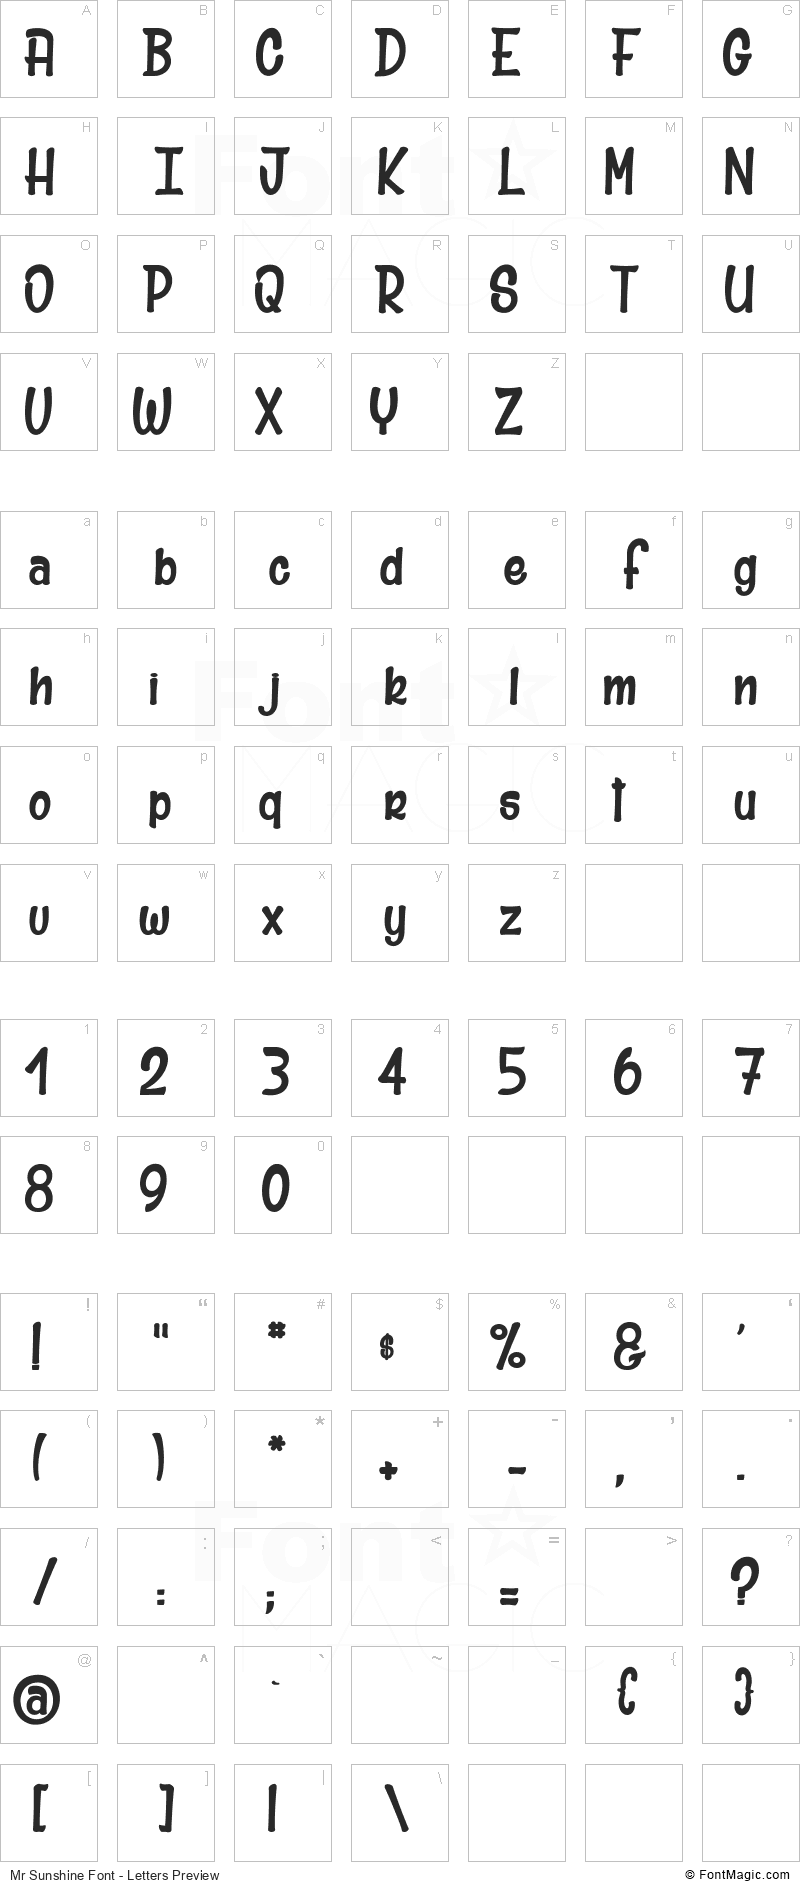 Mr Sunshine Font - All Latters Preview Chart